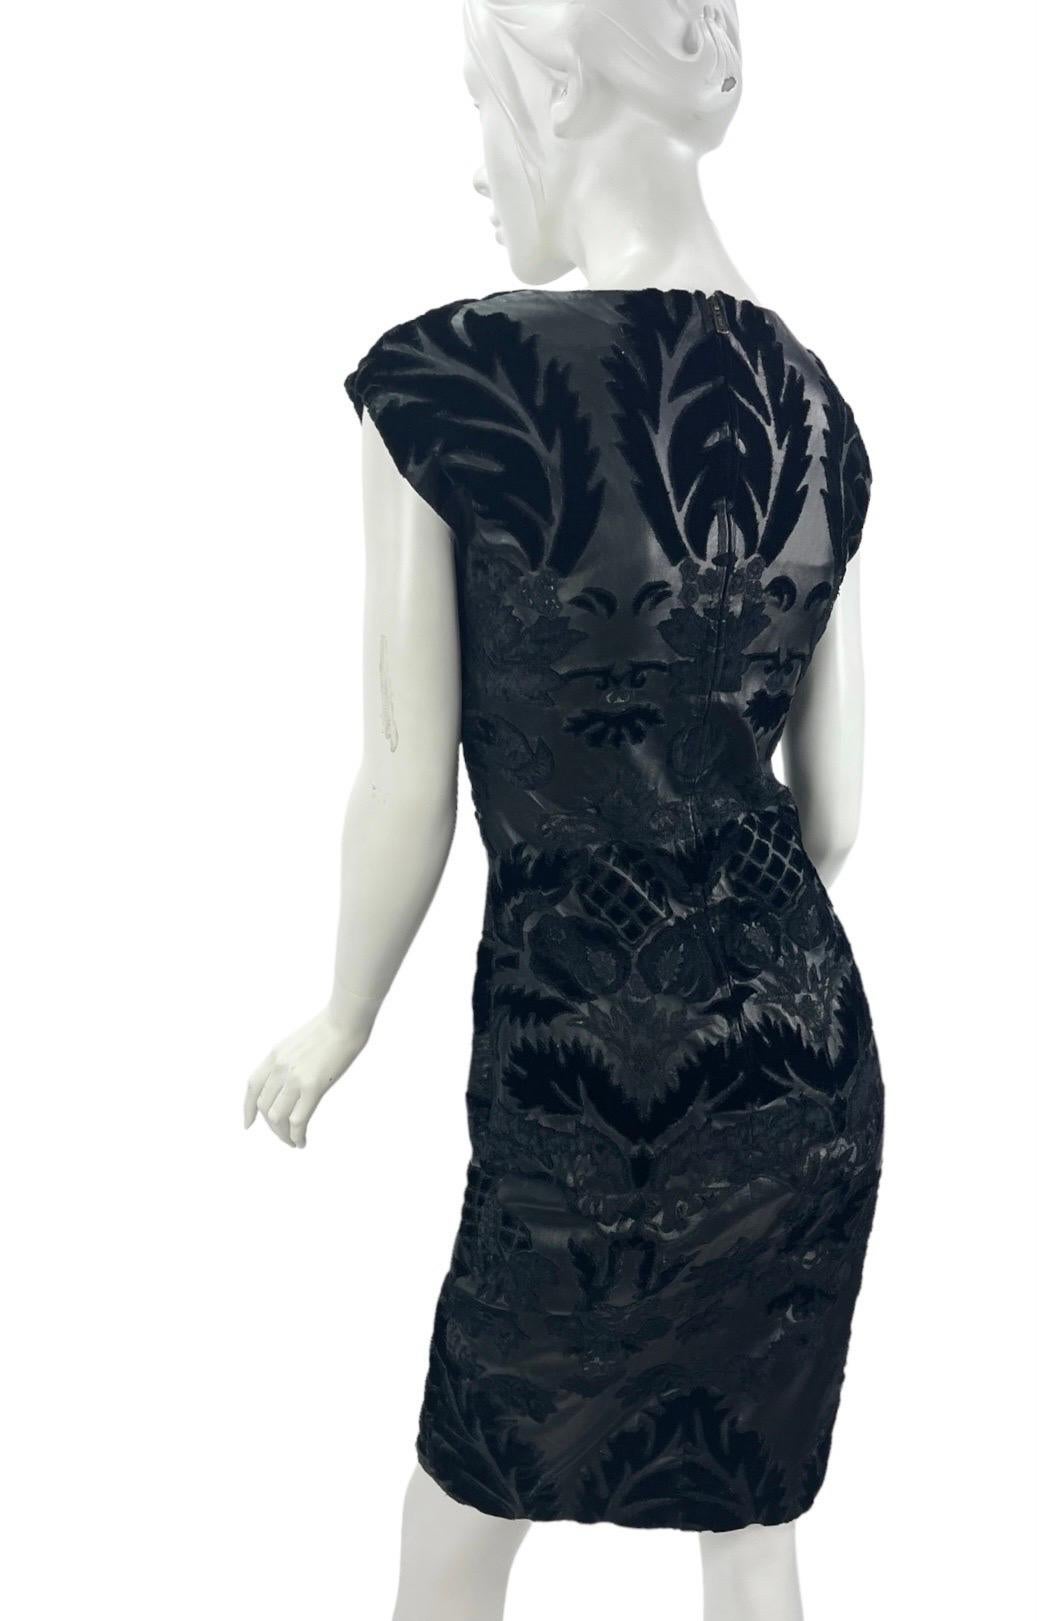 F/W 2002 Vintage Tom Ford for Yves Saint Laurent Black Leather Velvet Dress 36-4 In Excellent Condition For Sale In Montgomery, TX